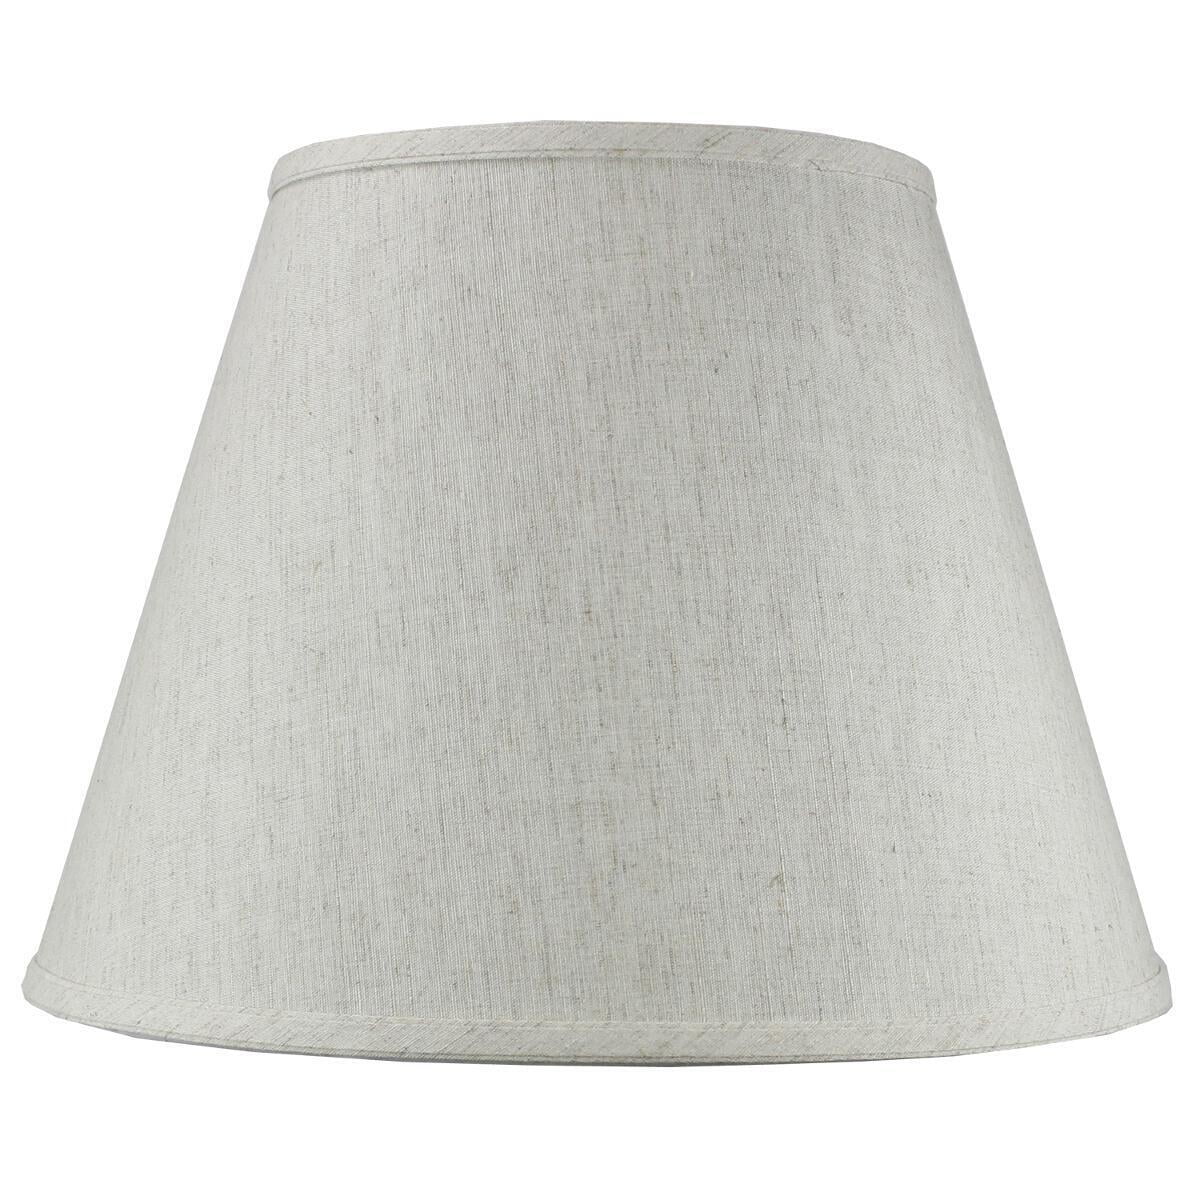 What Is A Slip Uno Lamp Shade